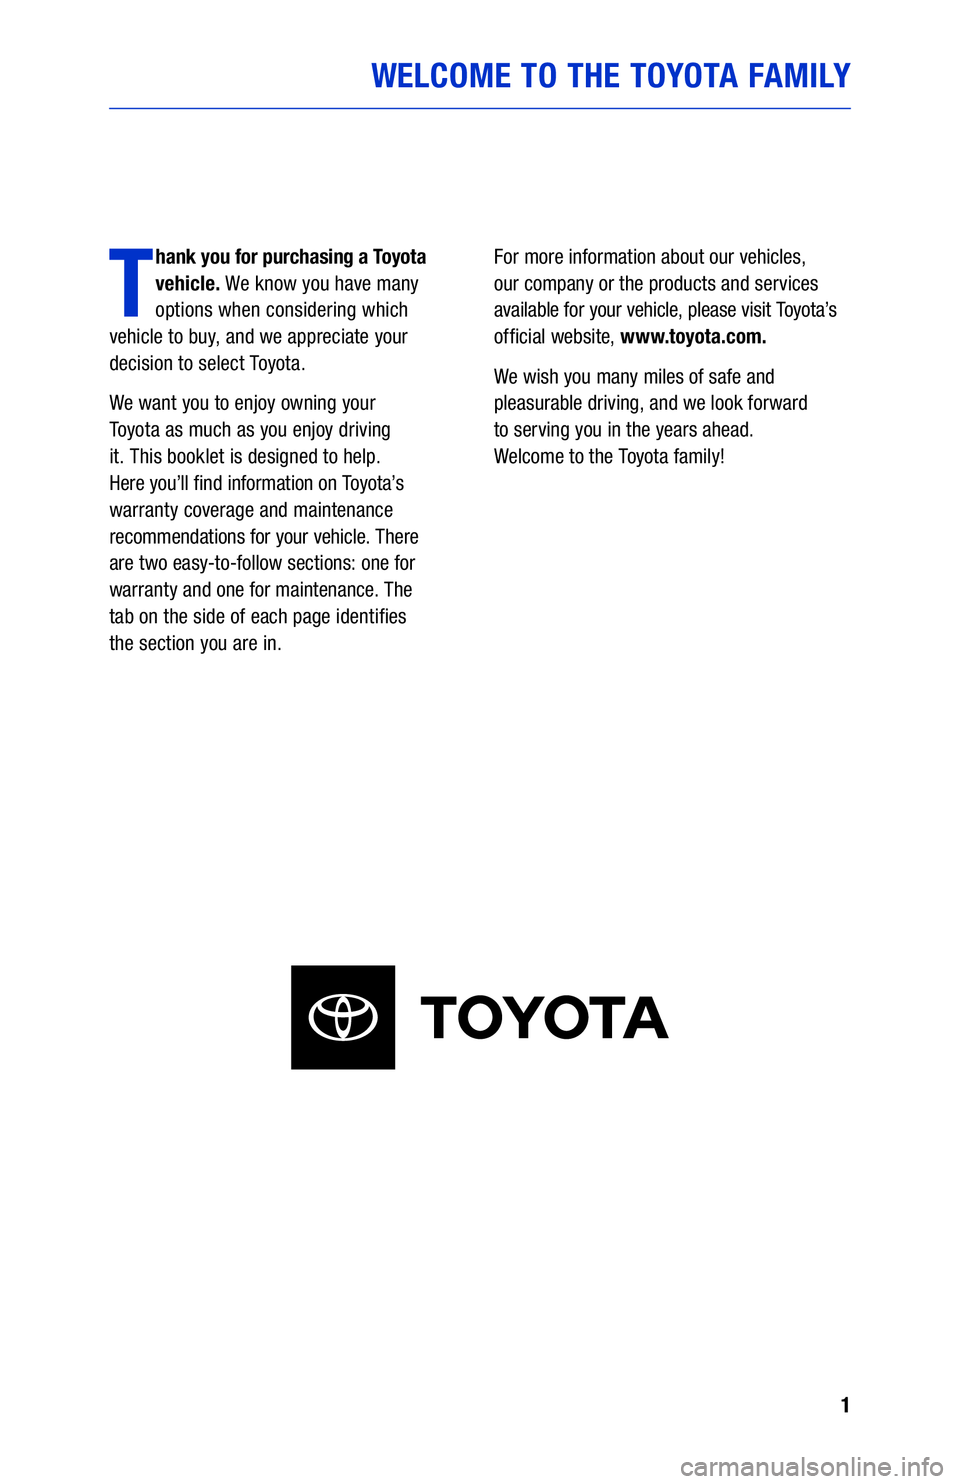 TOYOTA HIGHLANDER 2021  Warranties & Maintenance Guides (in English) 1
WELCOME TO THE TOYOTA FAMILY
T
hank you for purchasing a Toyota 
vehicle. We know you have many 
options when considering which   
vehicle to buy, and we appreciate your 
decision to select Toyota.
